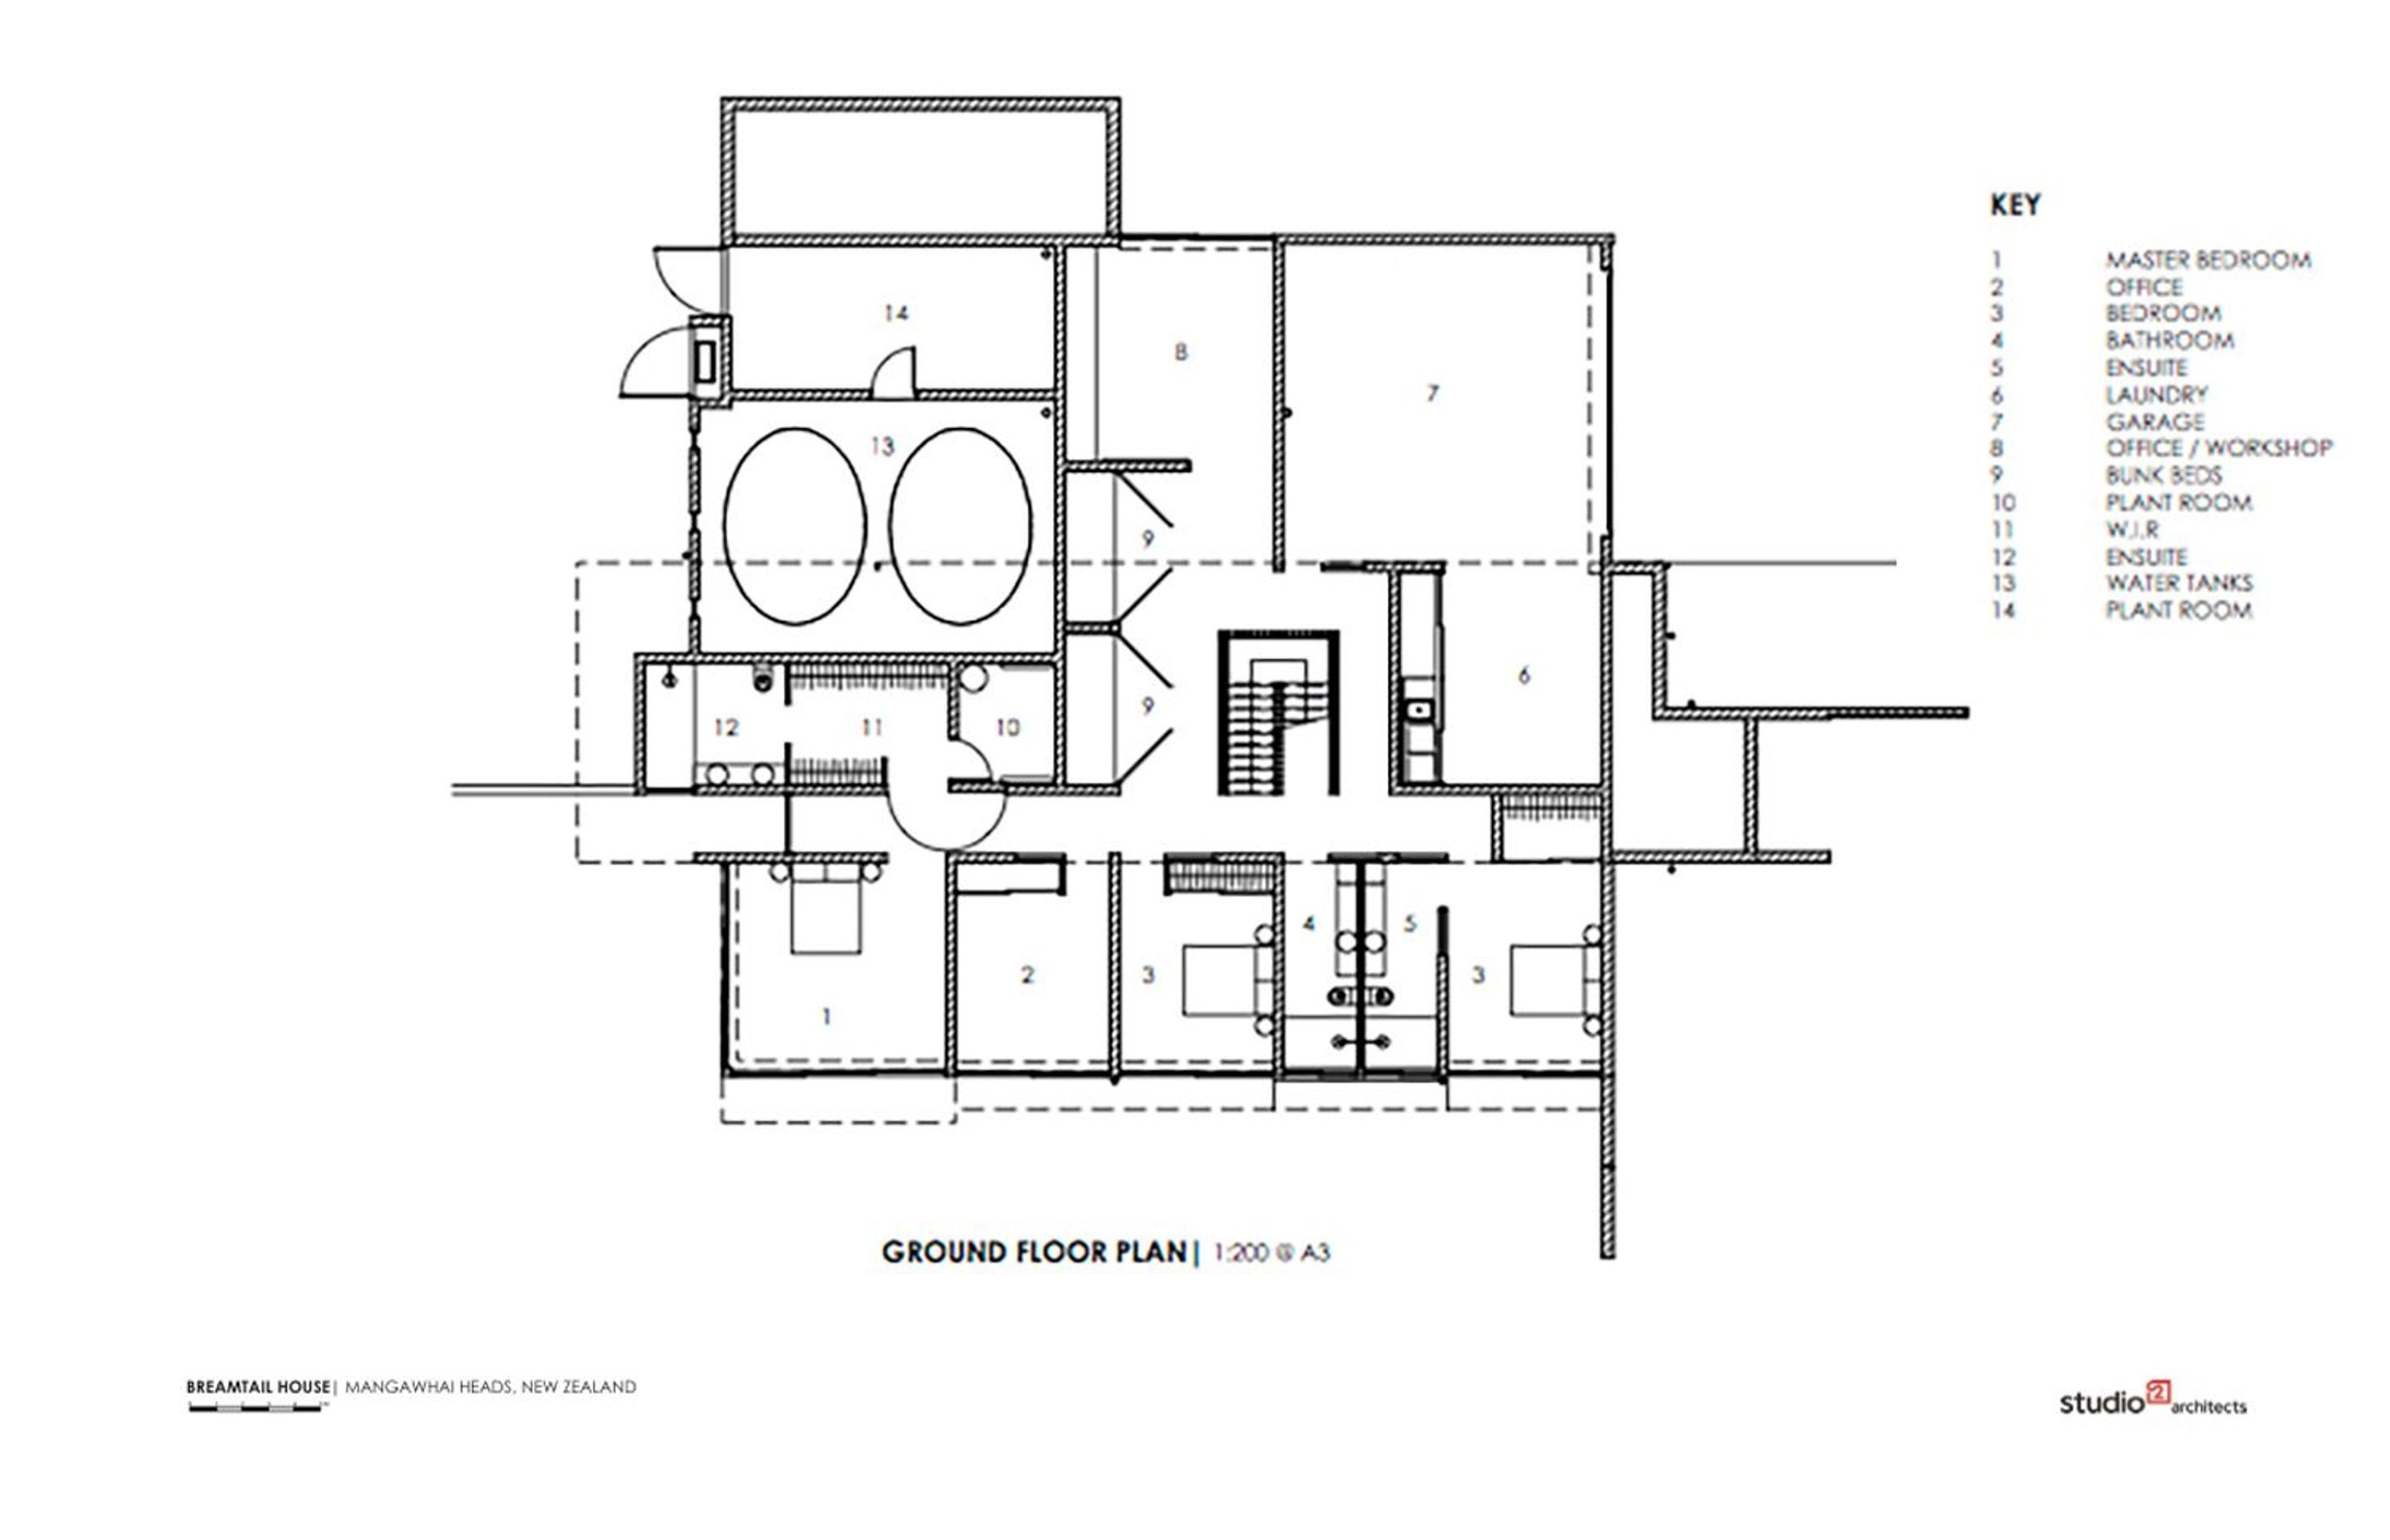 Breamtail House ground-floor plan by Studio2 Architects.